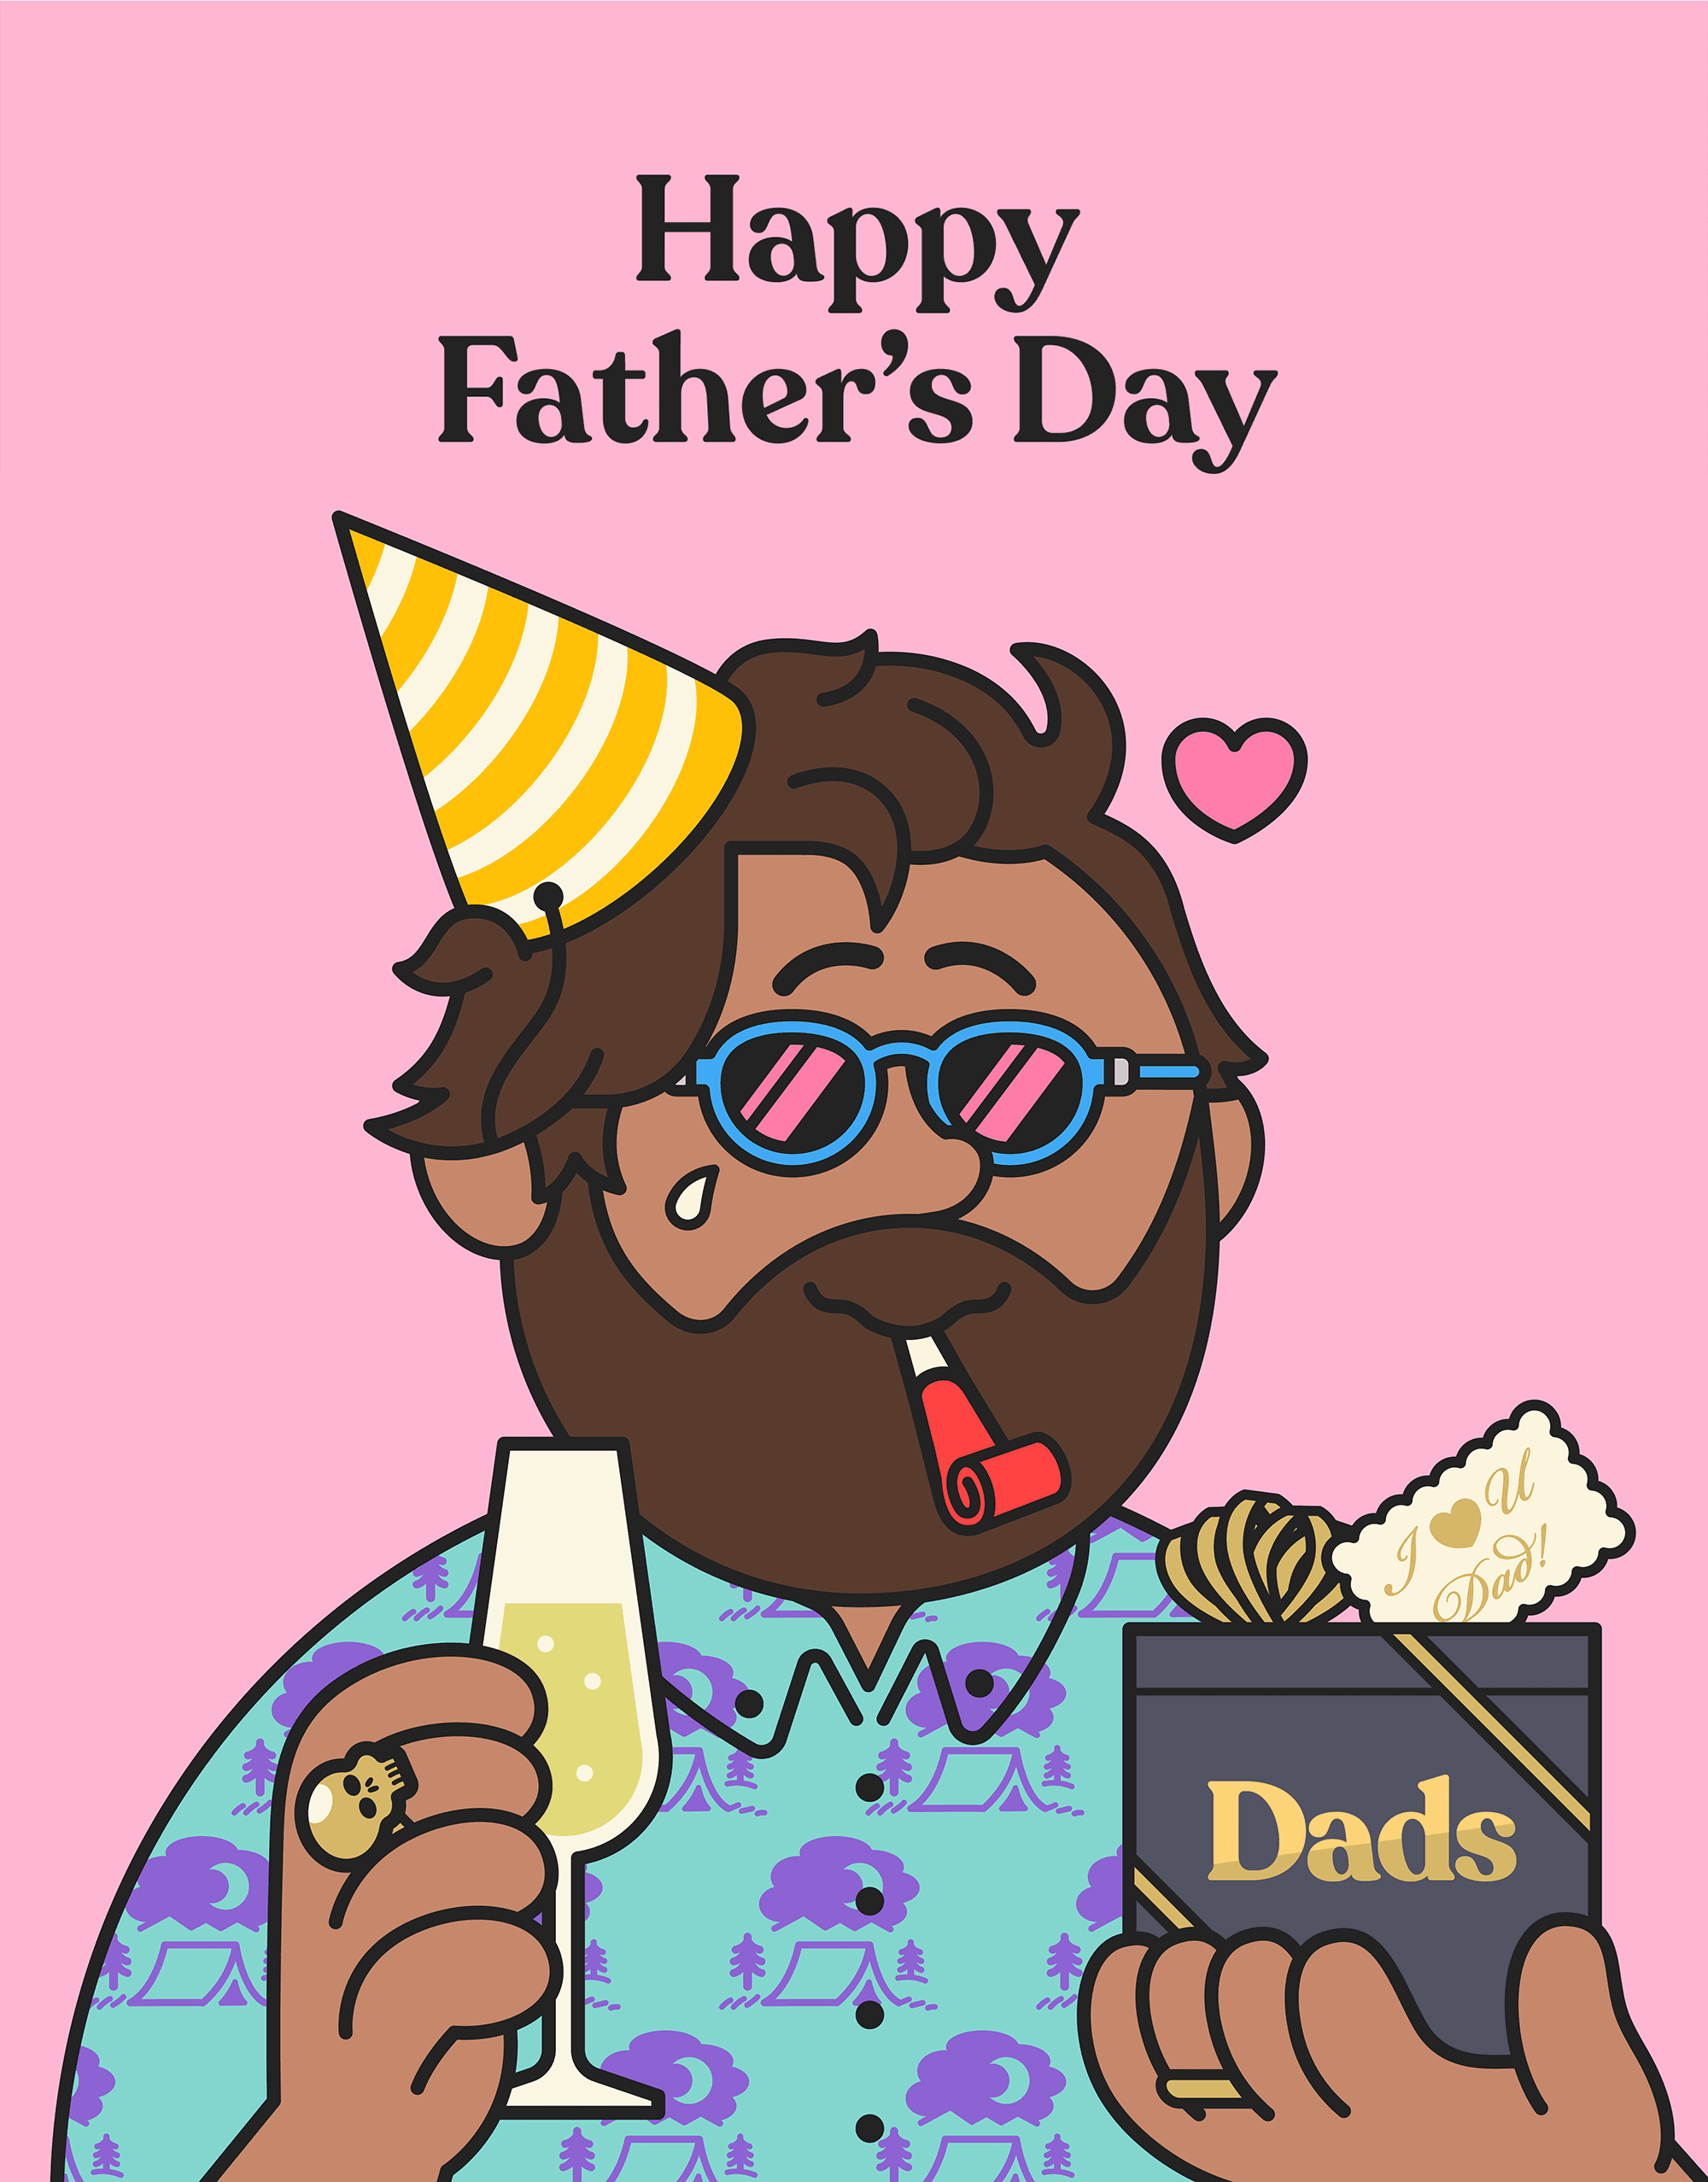 Happy Father's Day from Dads